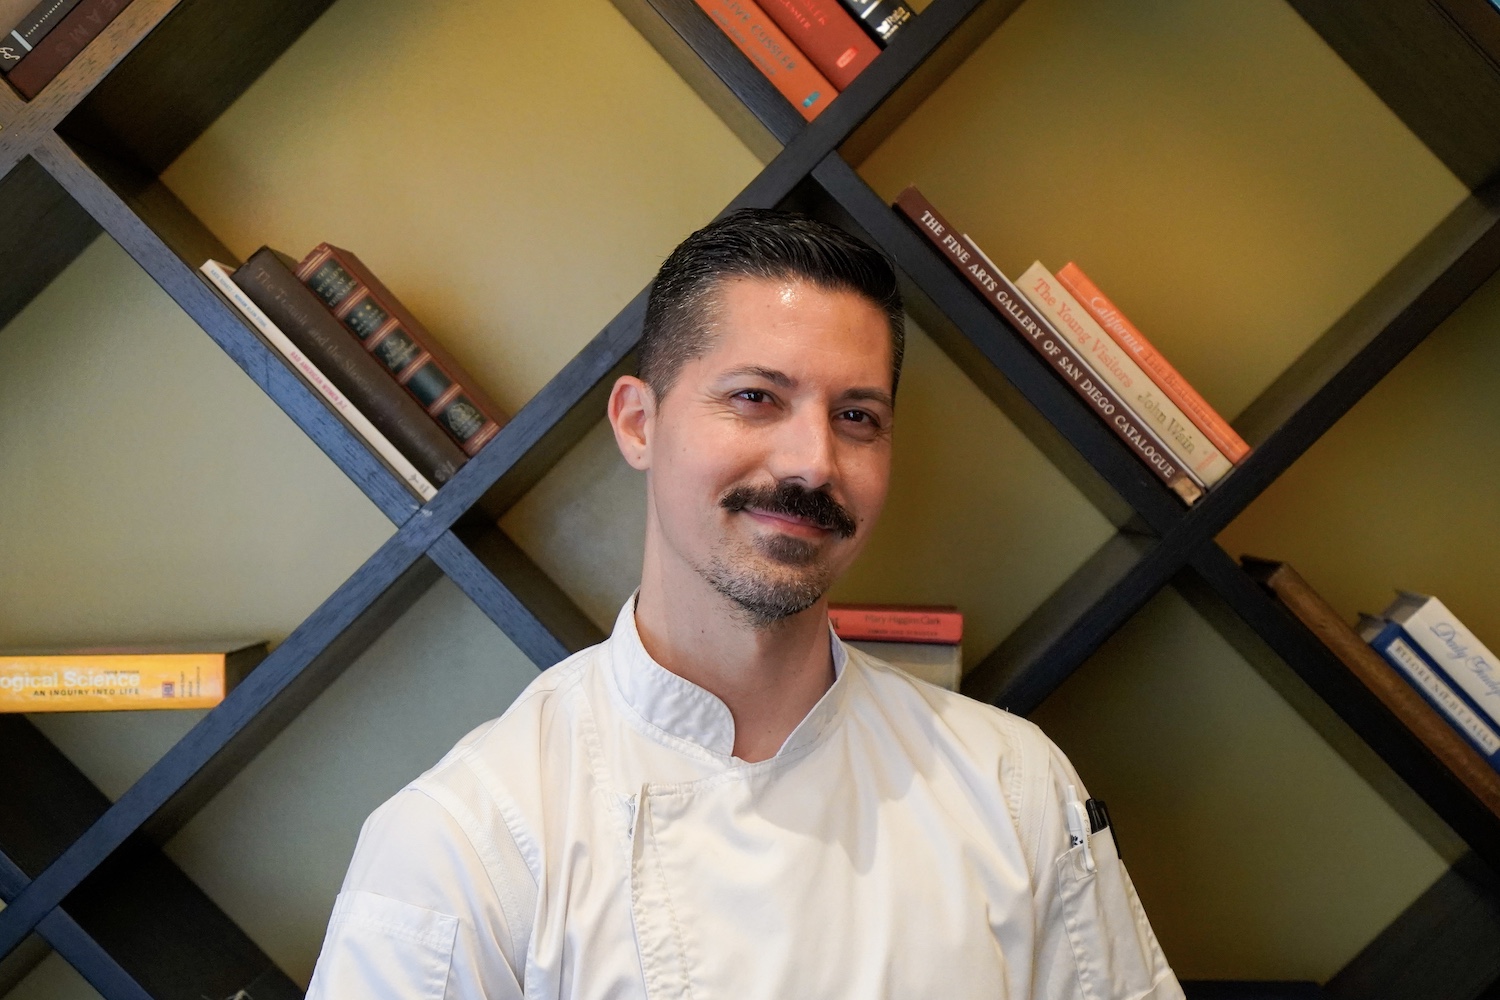 University Club chef Adrian Mendoza who is opening a new bakery and bistro in downtown San Diego called Knead Bakery